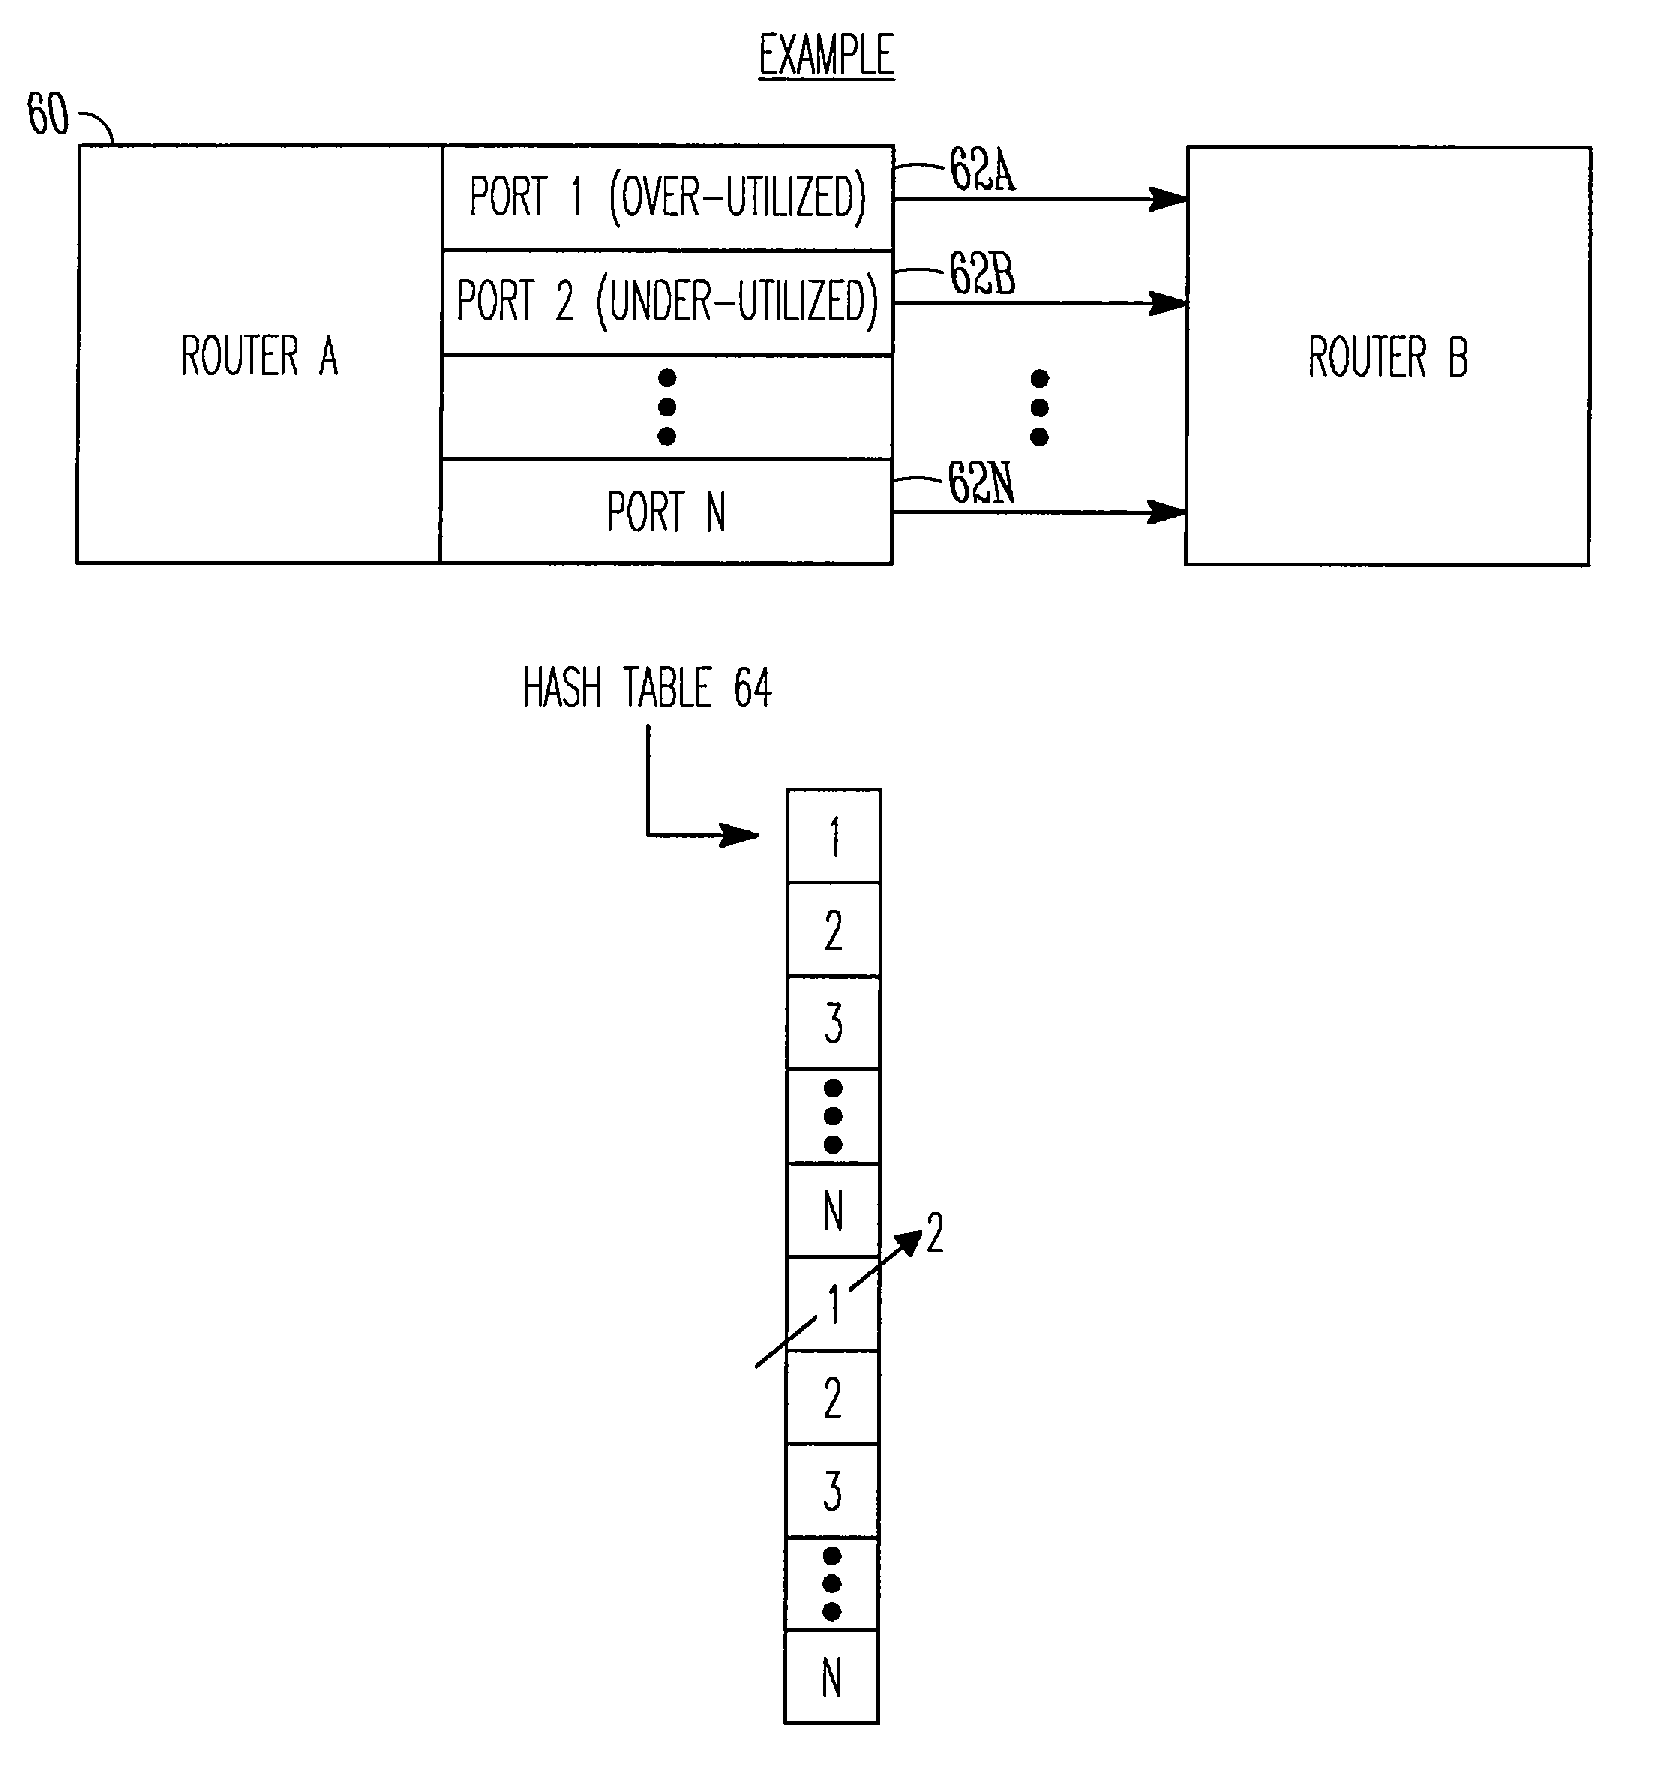 System and method for adaptively balancing network traffic over router output ports